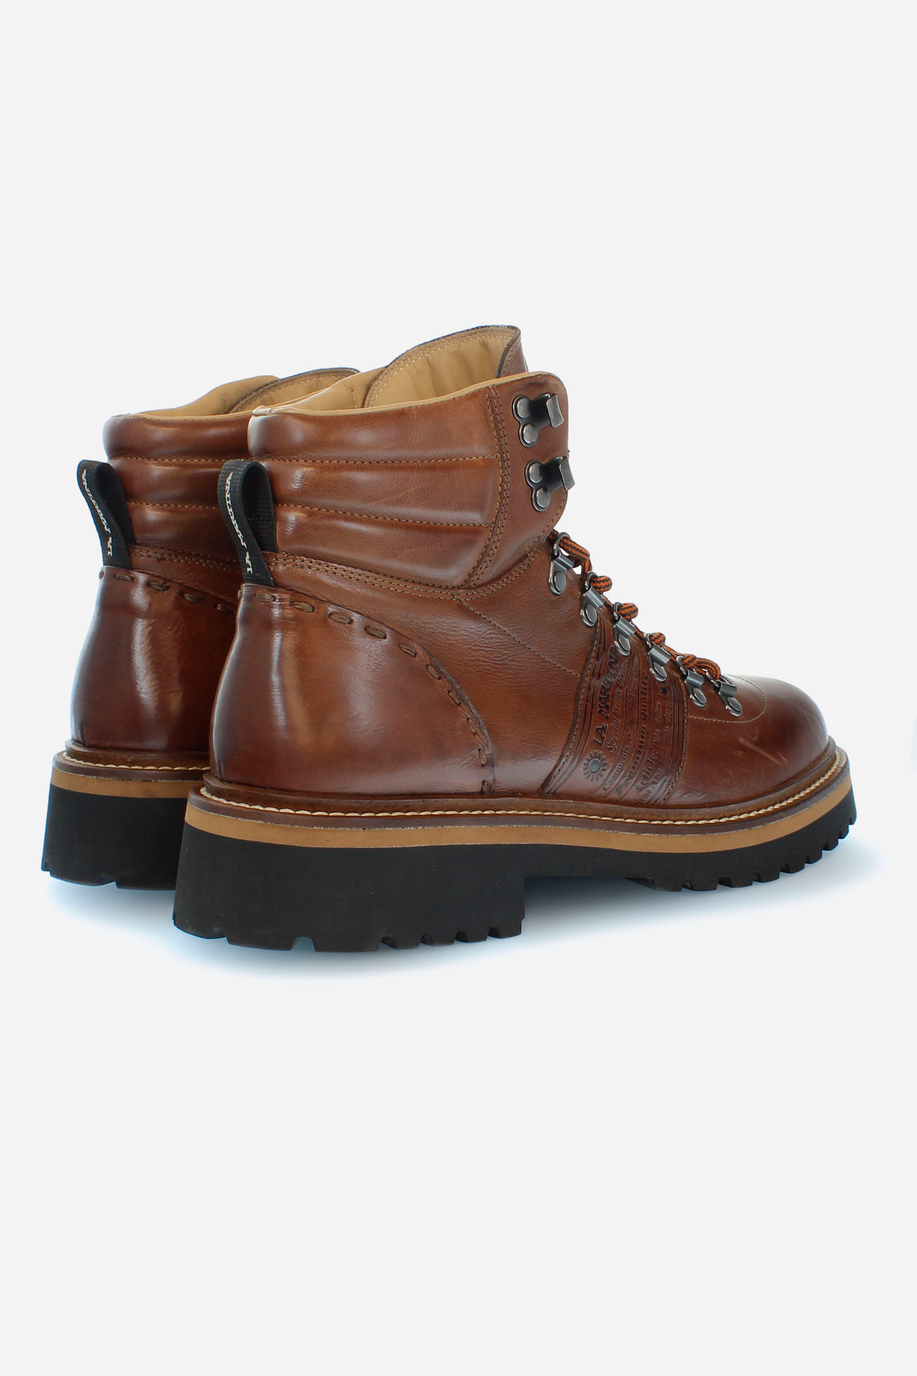 Men's urban style ankle boot in leather - test | La Martina - Official Online Shop